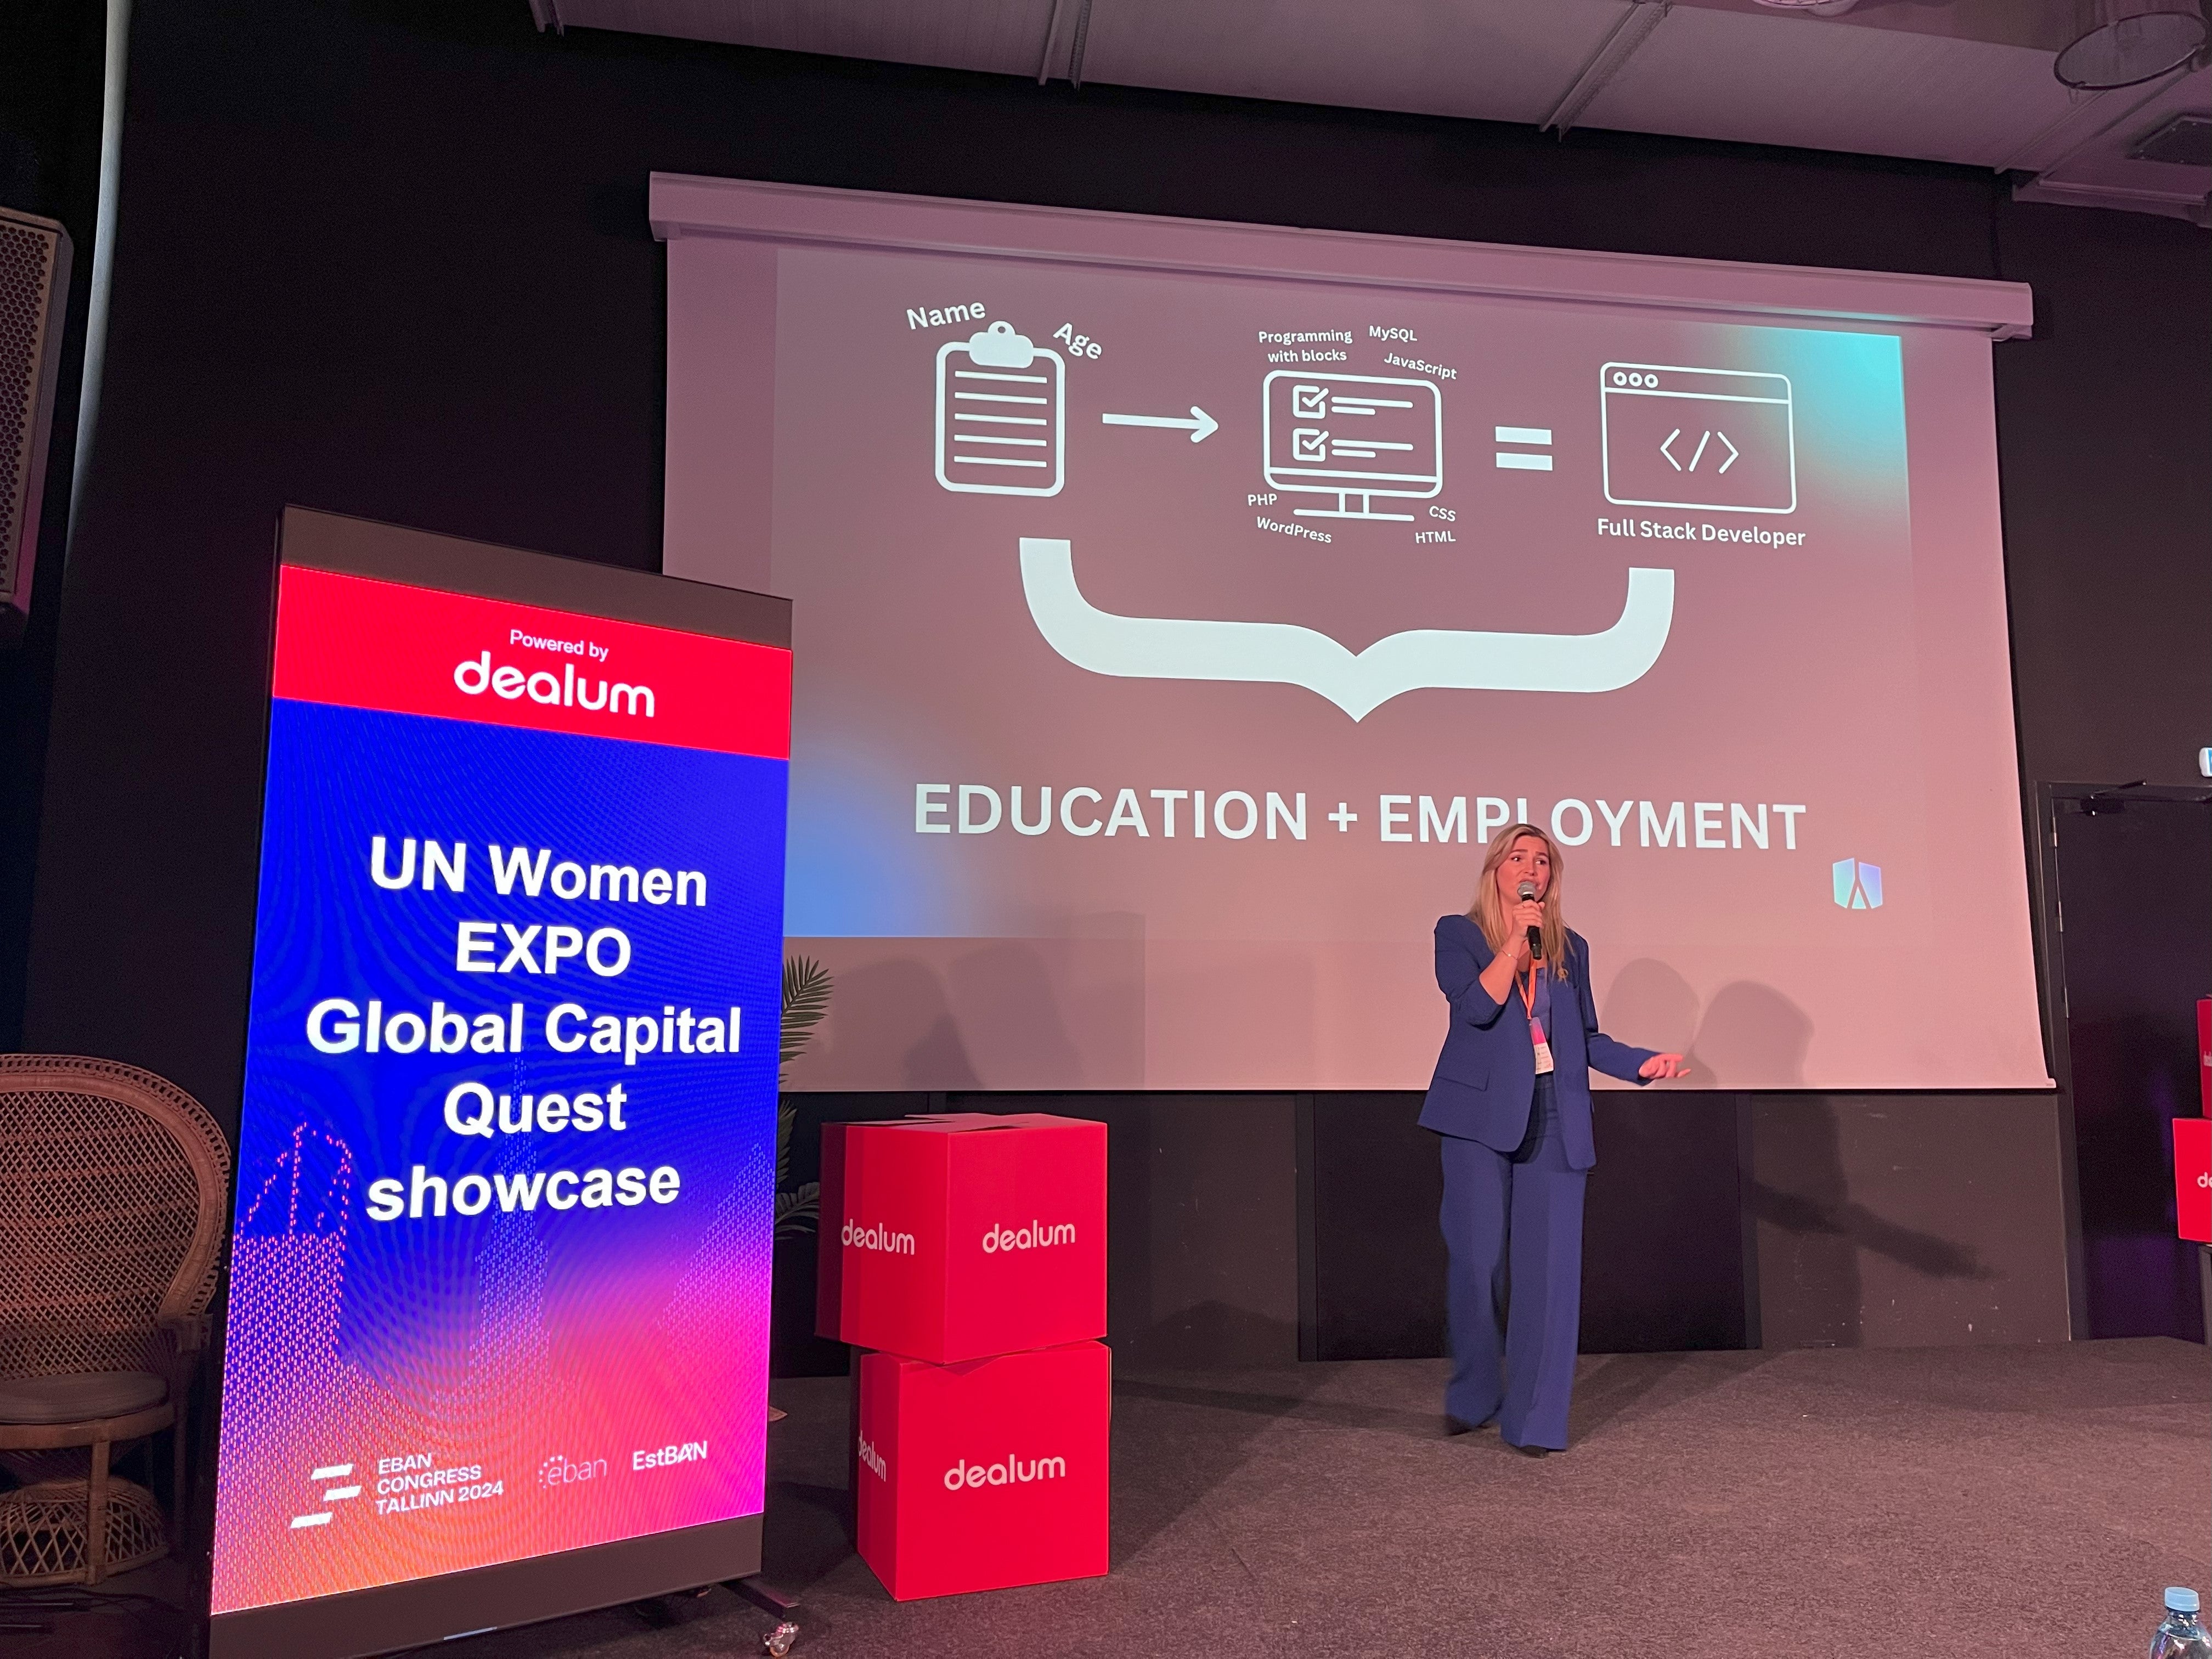 Fatbardha Dallku from Kosovo*, Founder of Innovation Academy, a learning academy offering modern programs and curricula for training youth, including on technology. Photo: UN Women